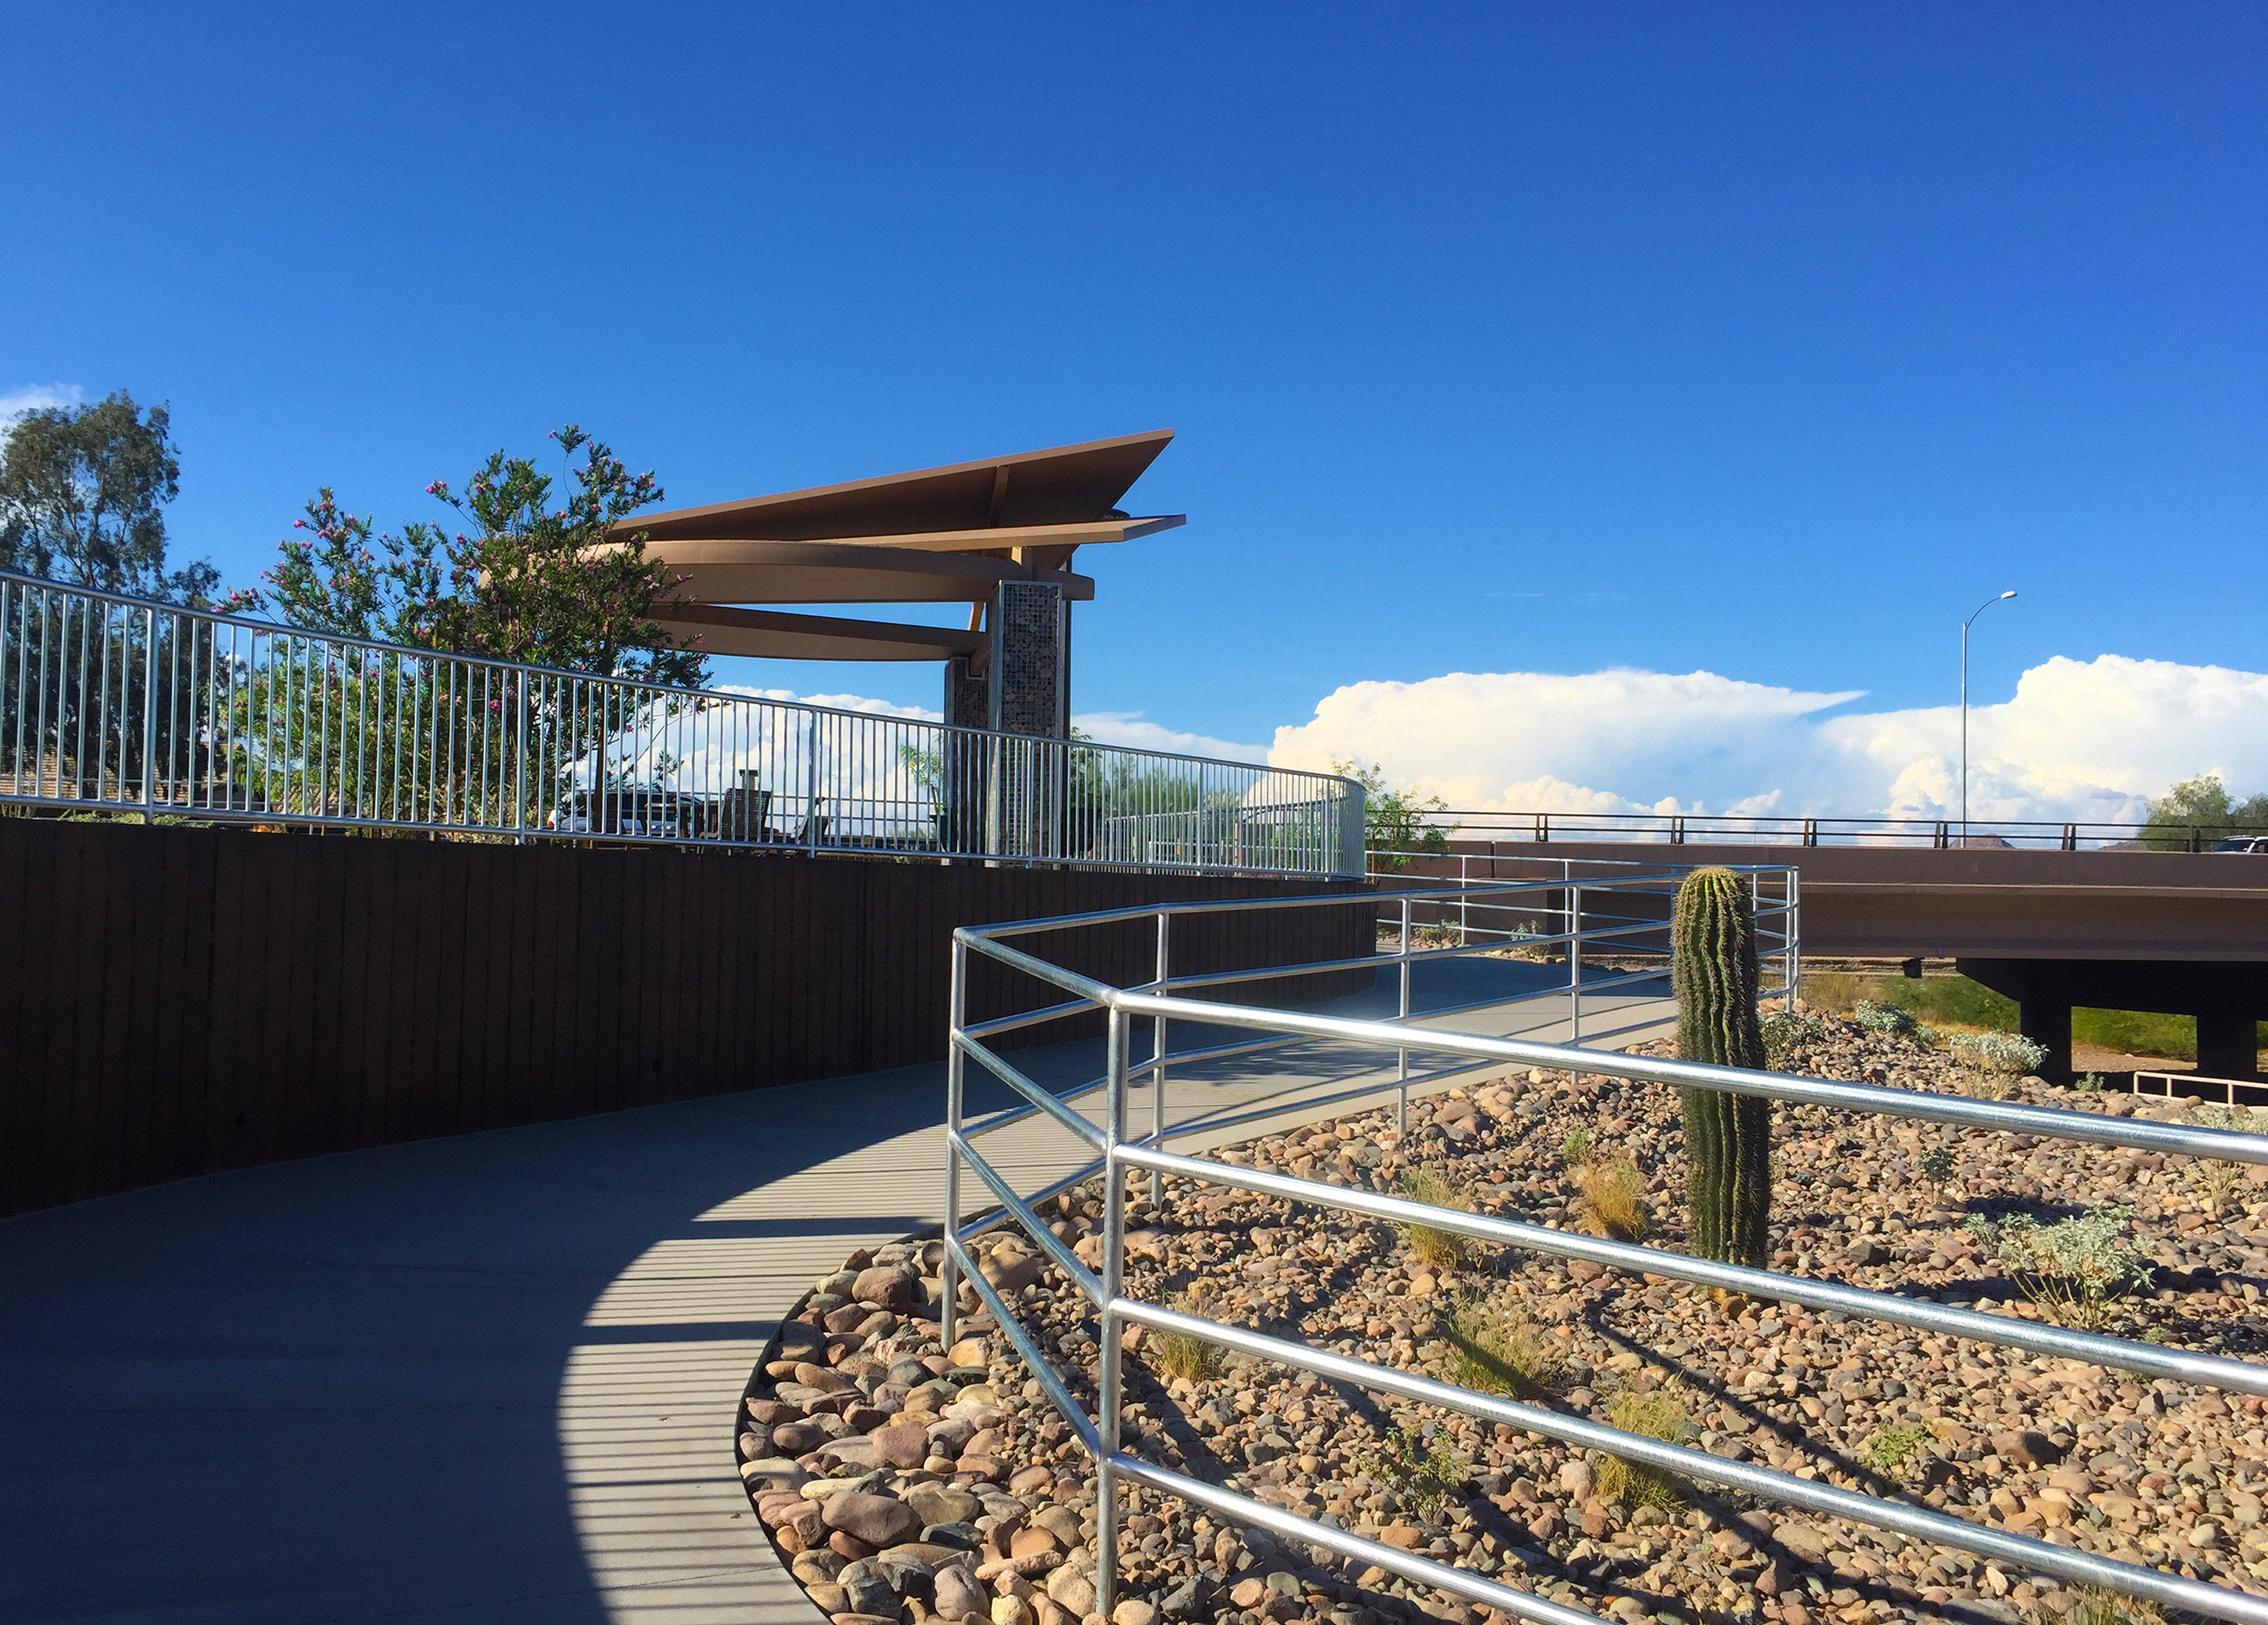 This trailhead provides a connection to the multi-use path from the south side of Deer Valley Road and access to the 10.5 miles of continuous paved pathway along New River.